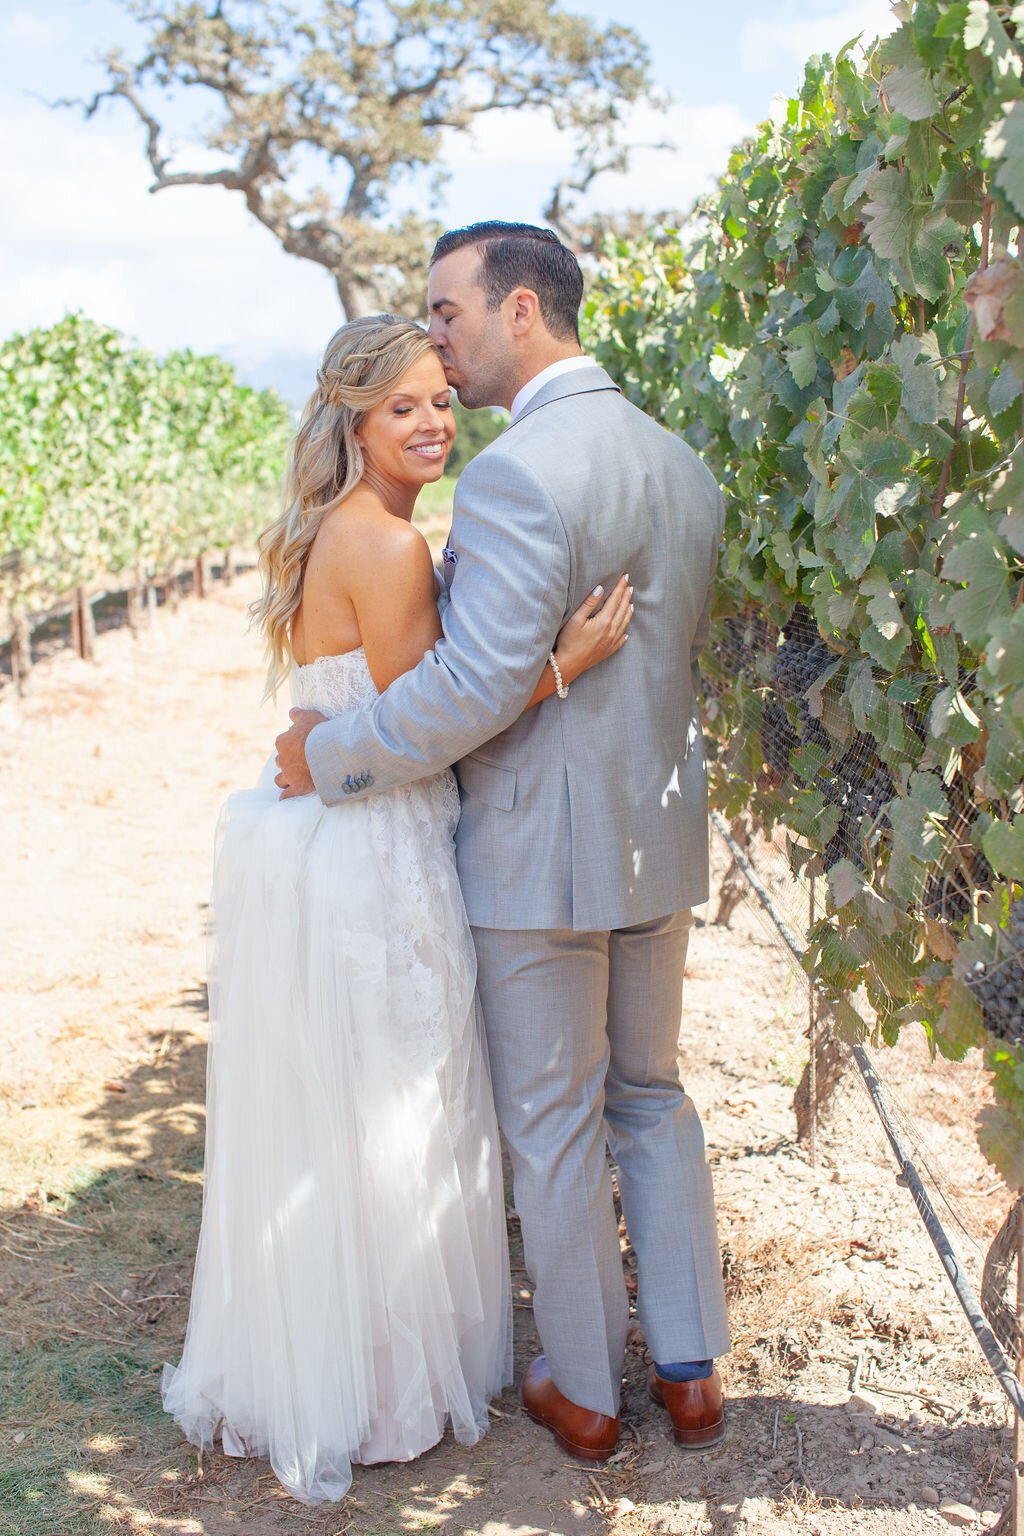 www.santabarbarawedding.com | Fess Parker Wine Country Inn | Epiphany Events | Linda Chaja | Wild Poppy Floral Design | The Couple at the Vineyard 